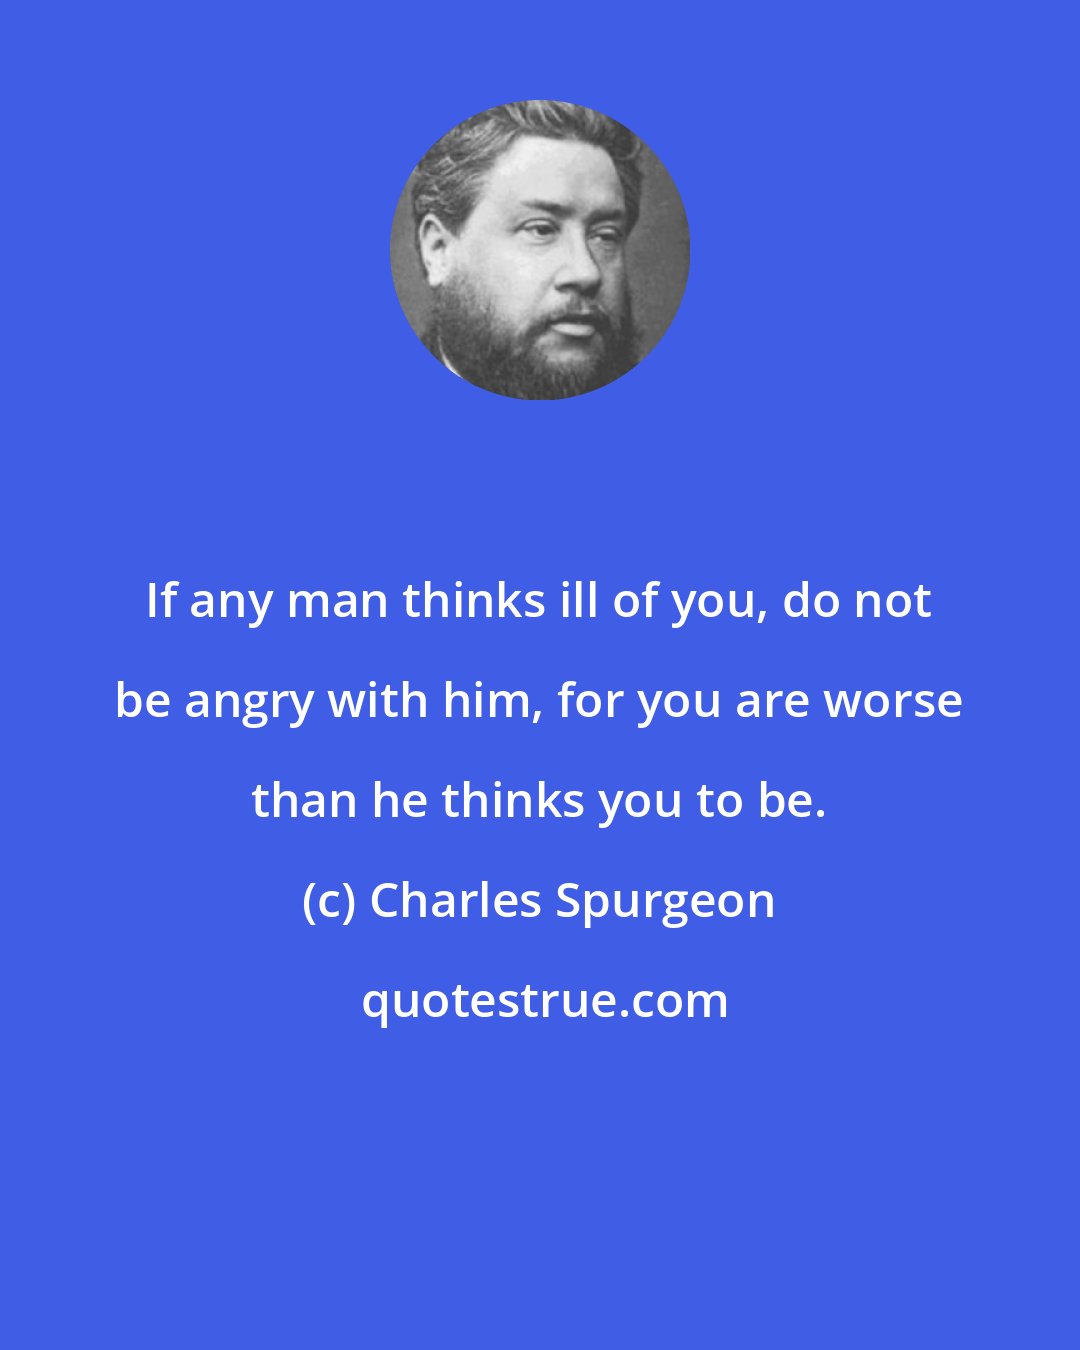 Charles Spurgeon: If any man thinks ill of you, do not be angry with him, for you are worse than he thinks you to be.